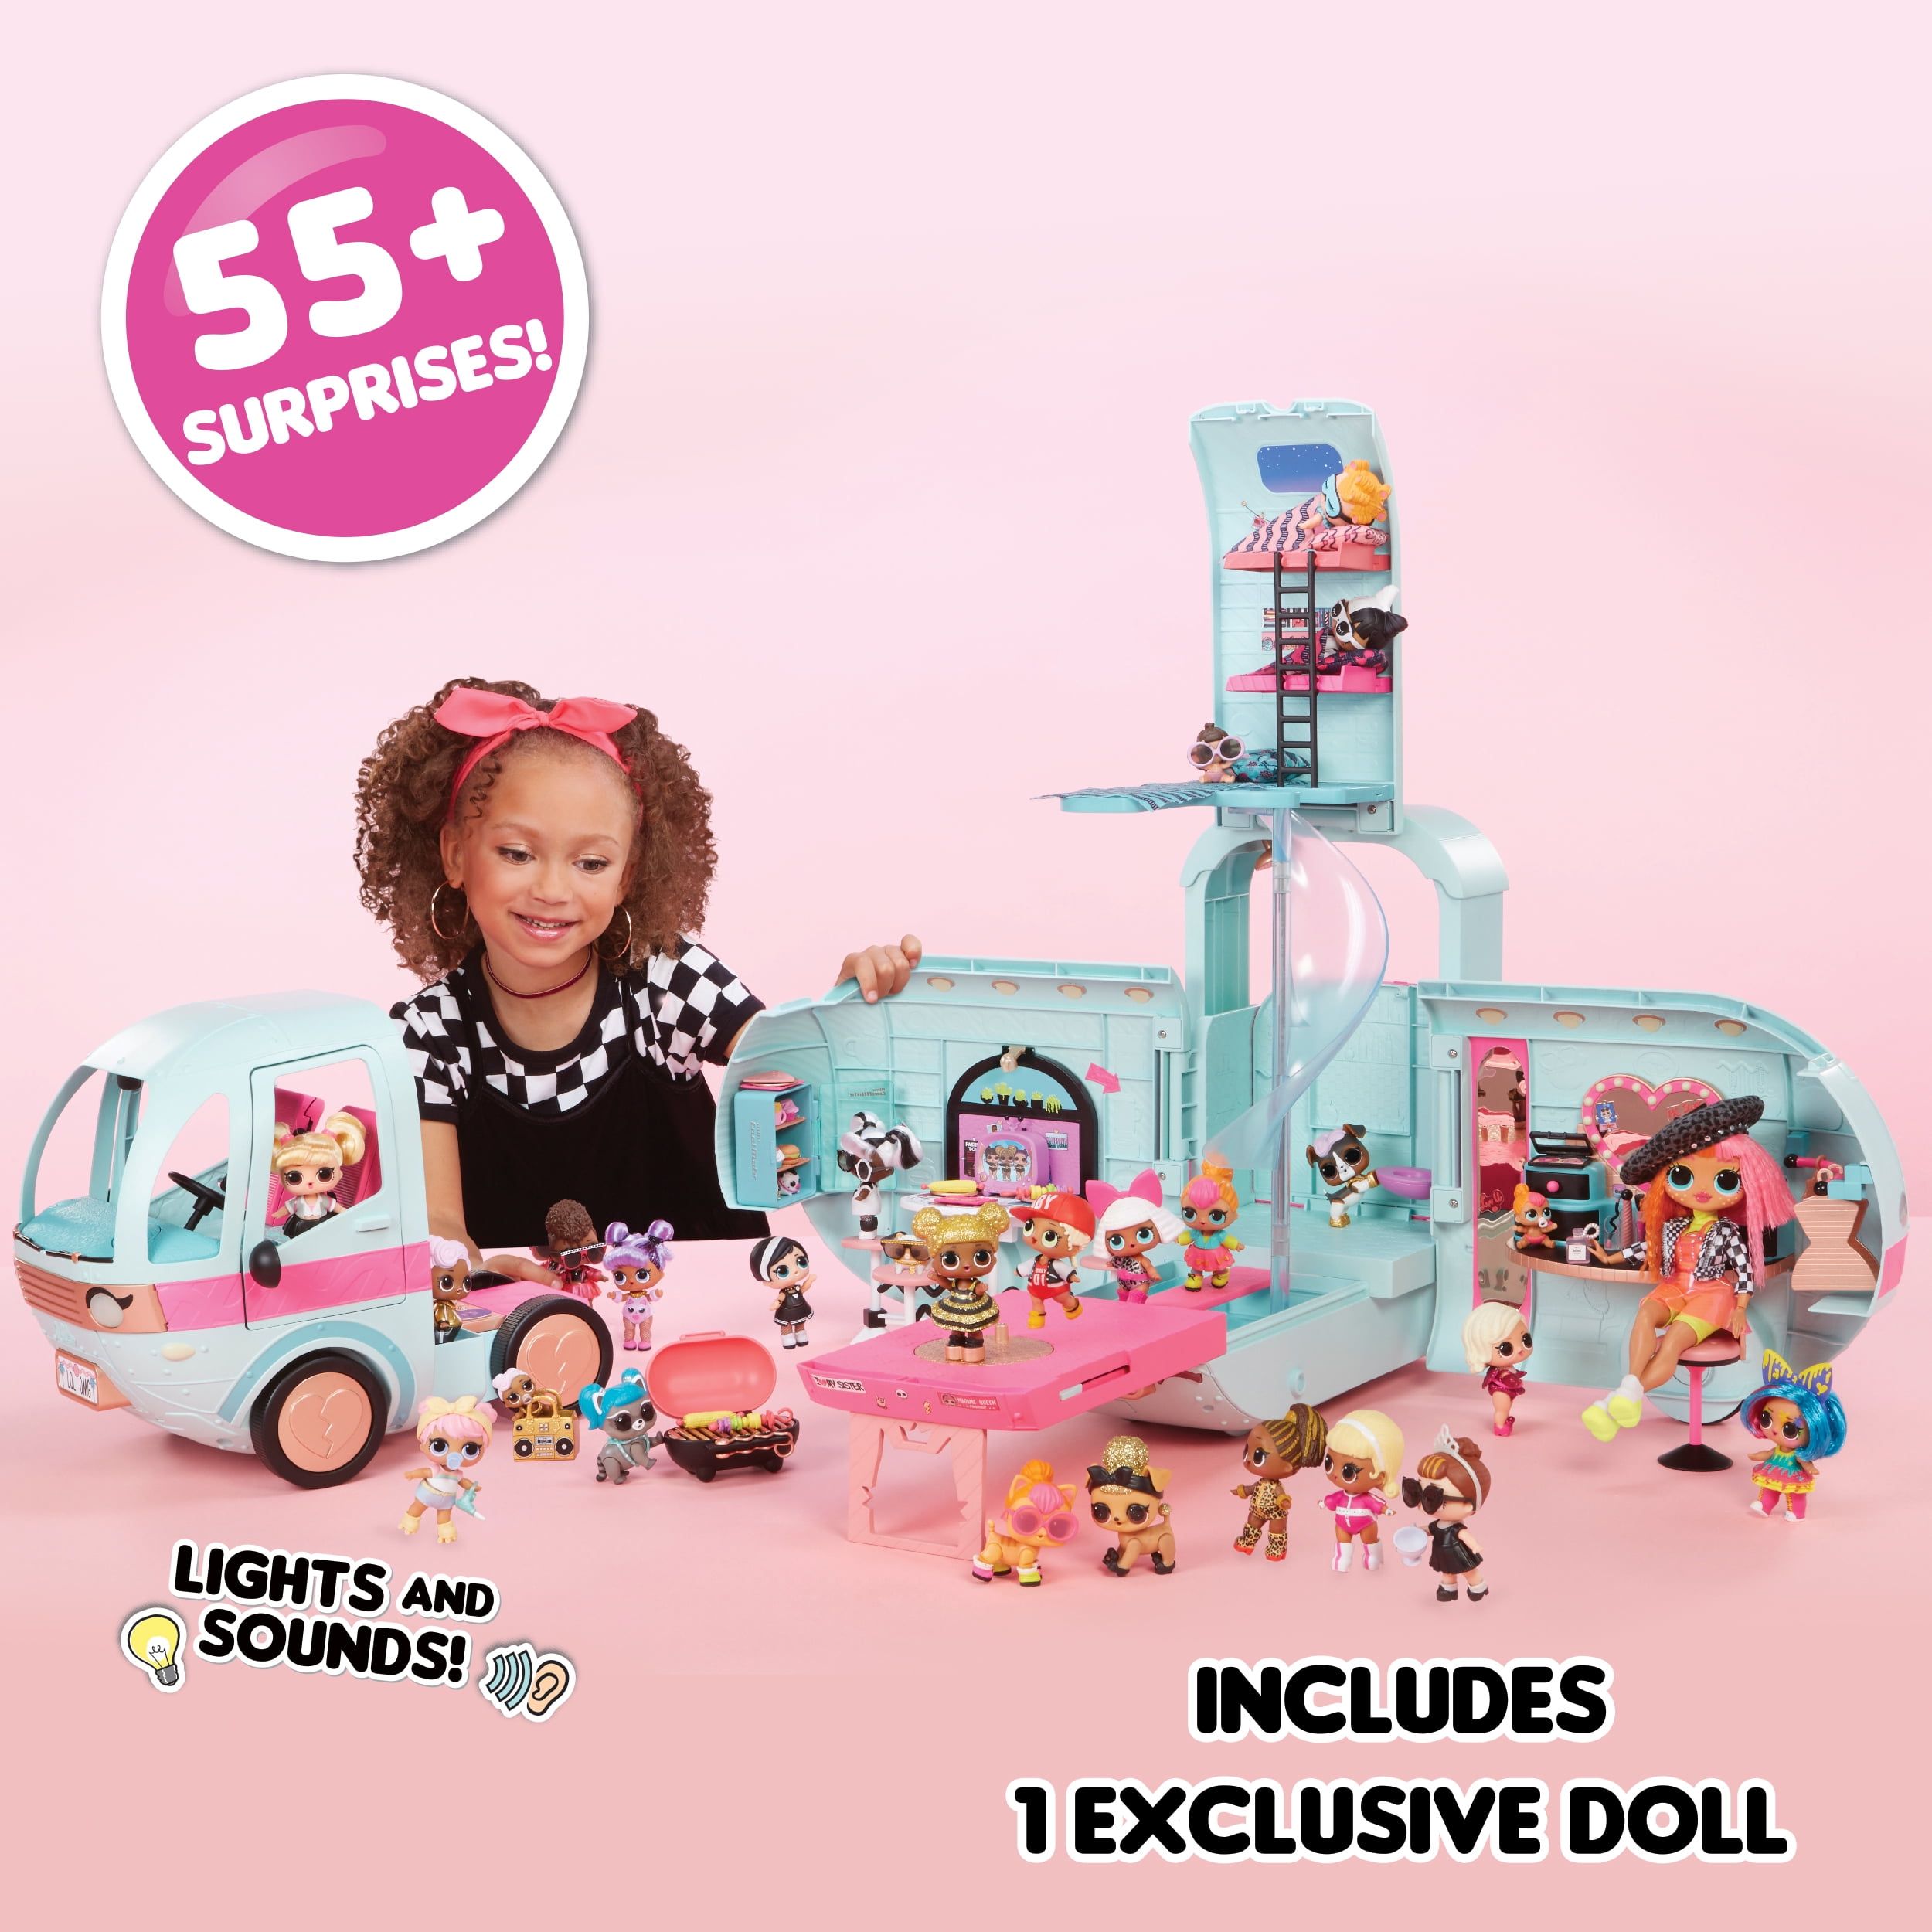 LOL Surprise 2-in-1 Glamper Fashion Camper With 55+ Surprises 